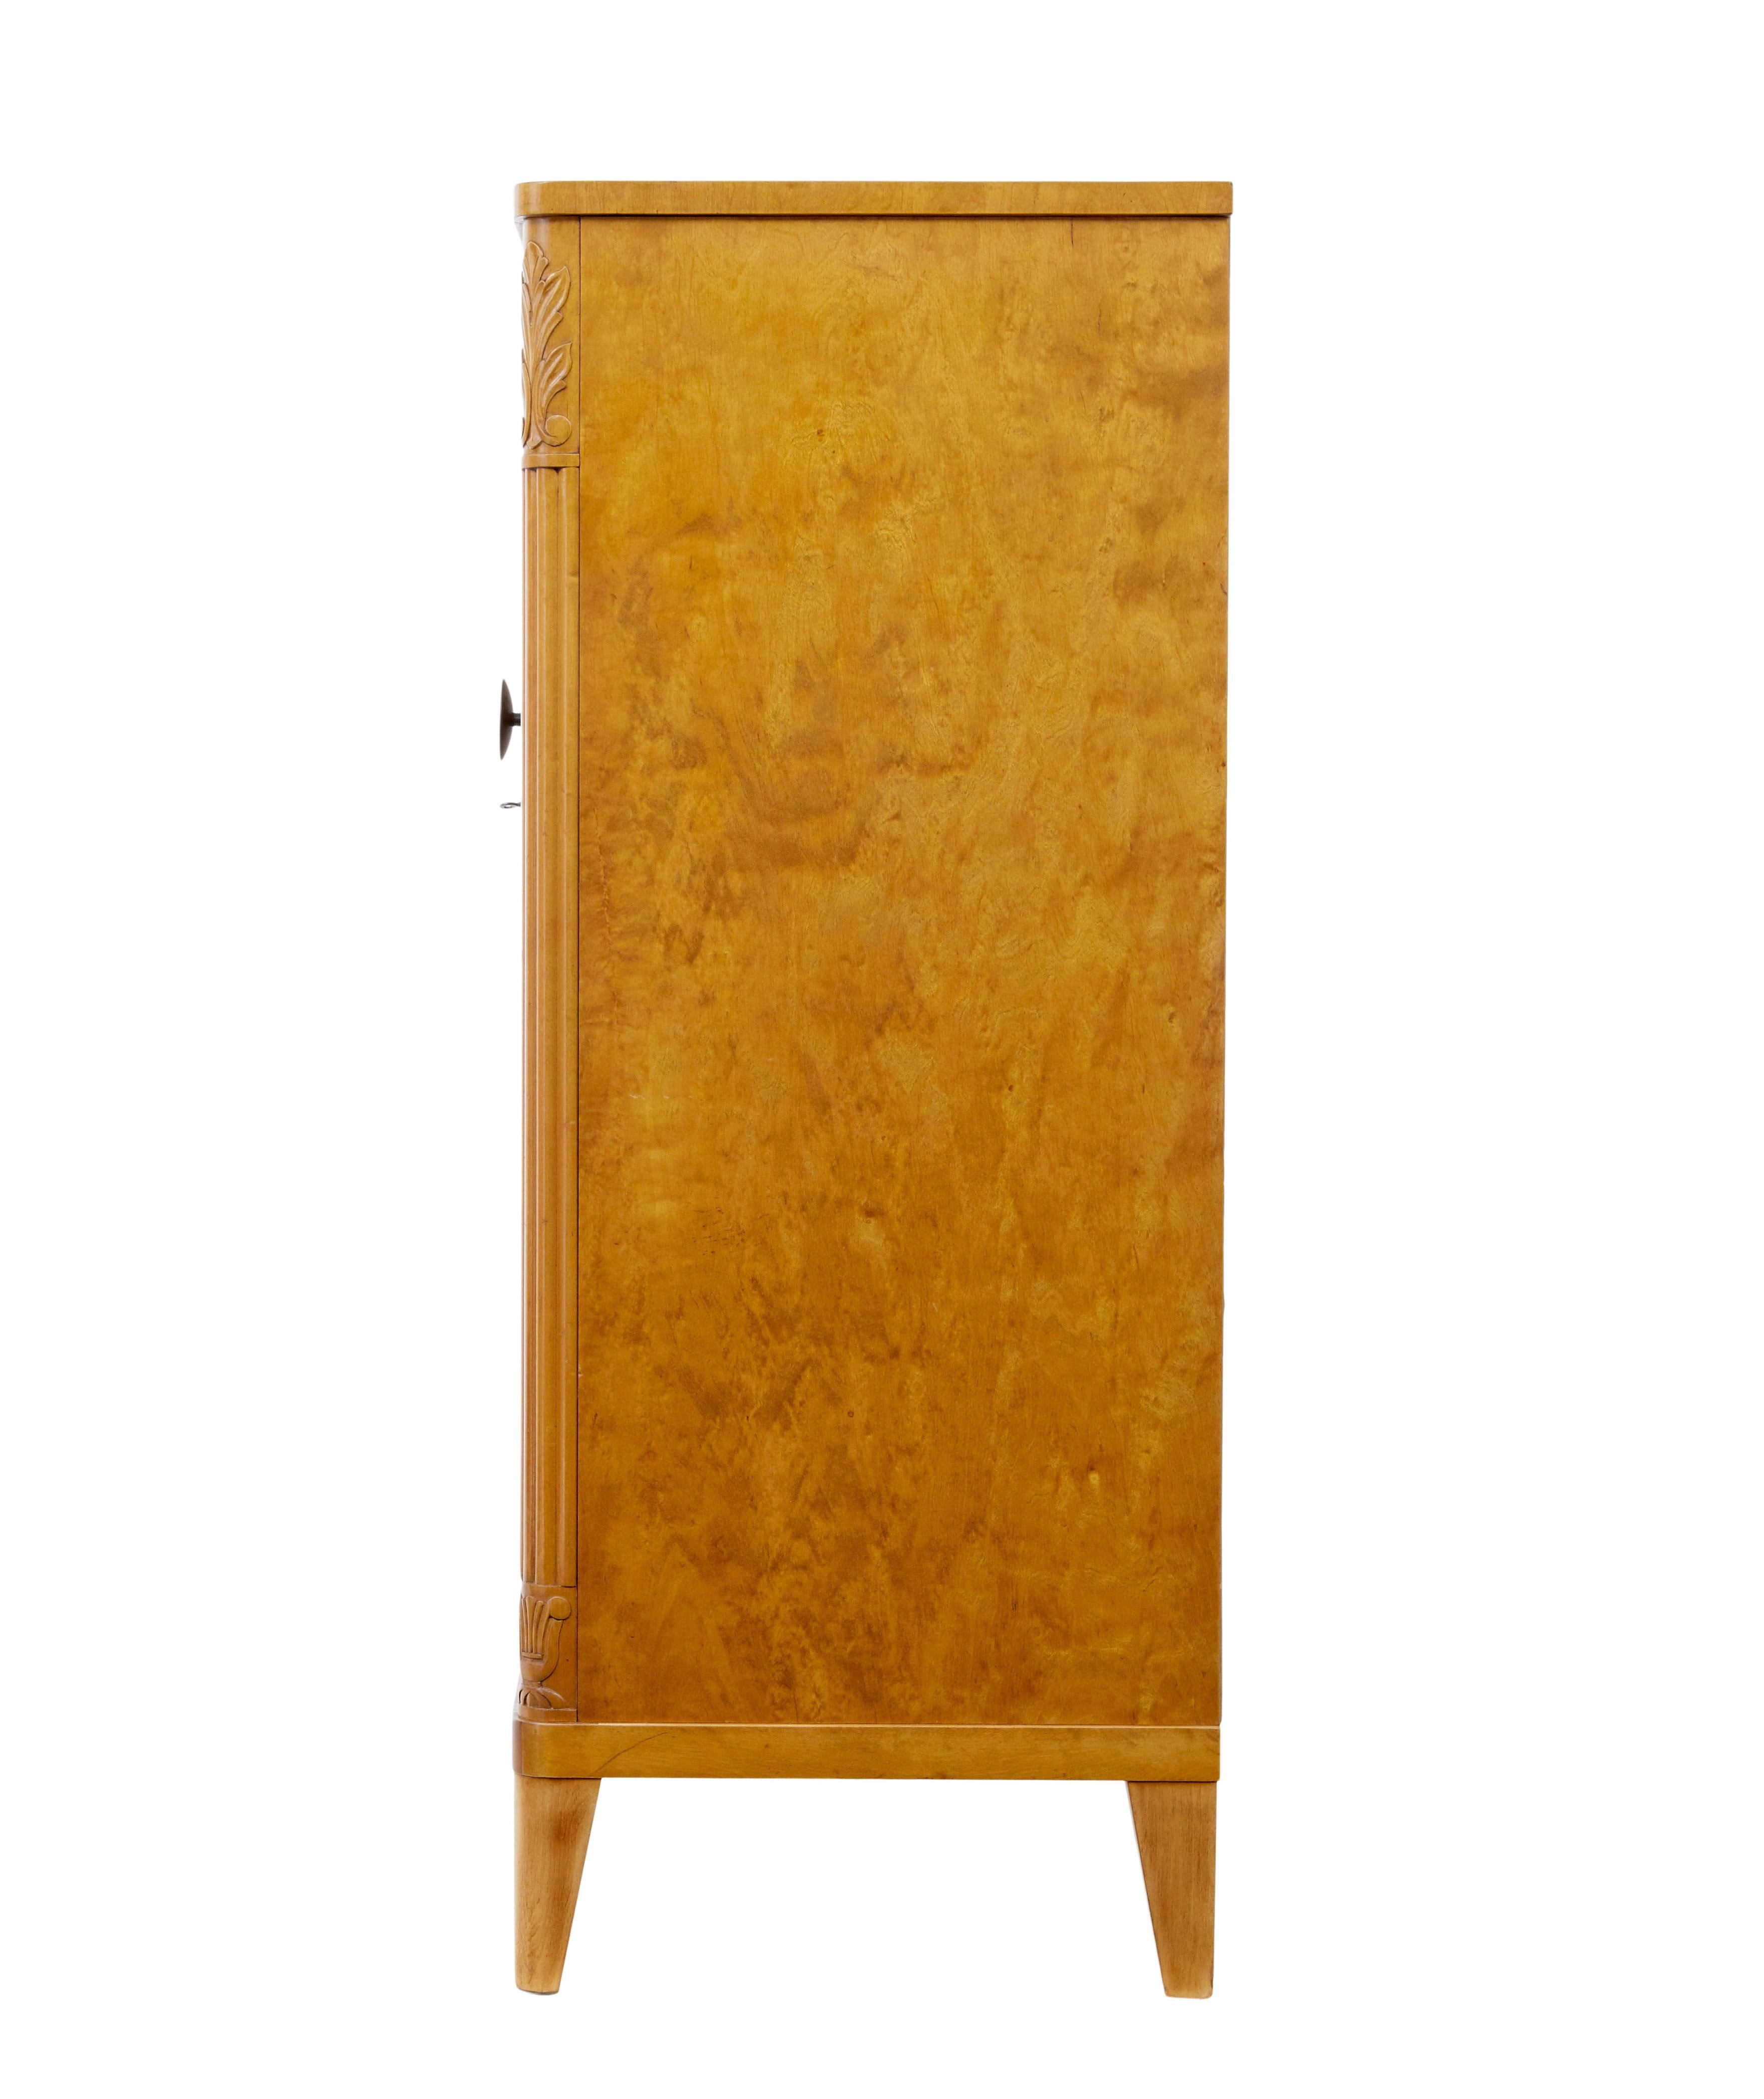 20th Century Swedish mid century modern elm and birch sideboard For Sale